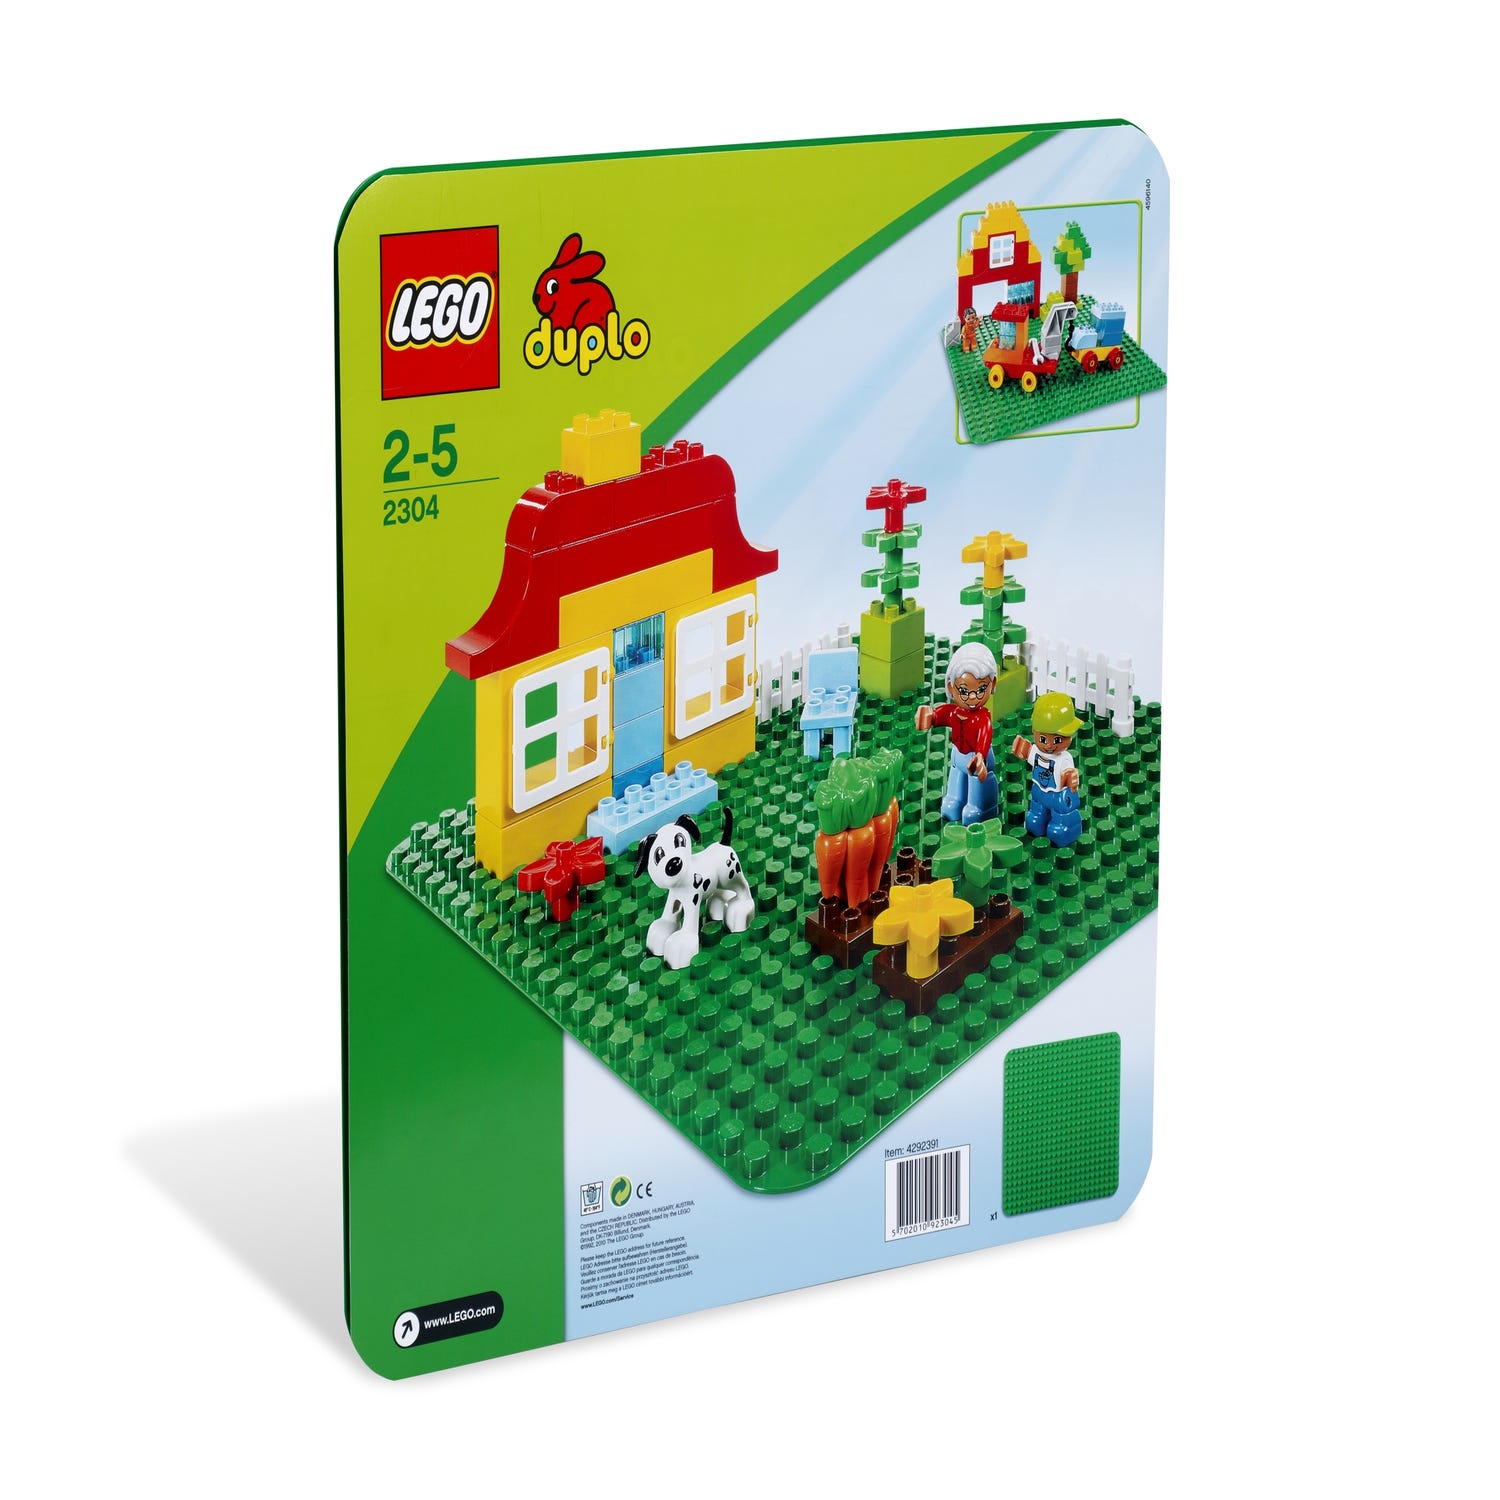 George Eliot mode Lab LEGO® DUPLO® Green Baseplate 2304 | DUPLO® | Buy online at the Official LEGO®  Shop US